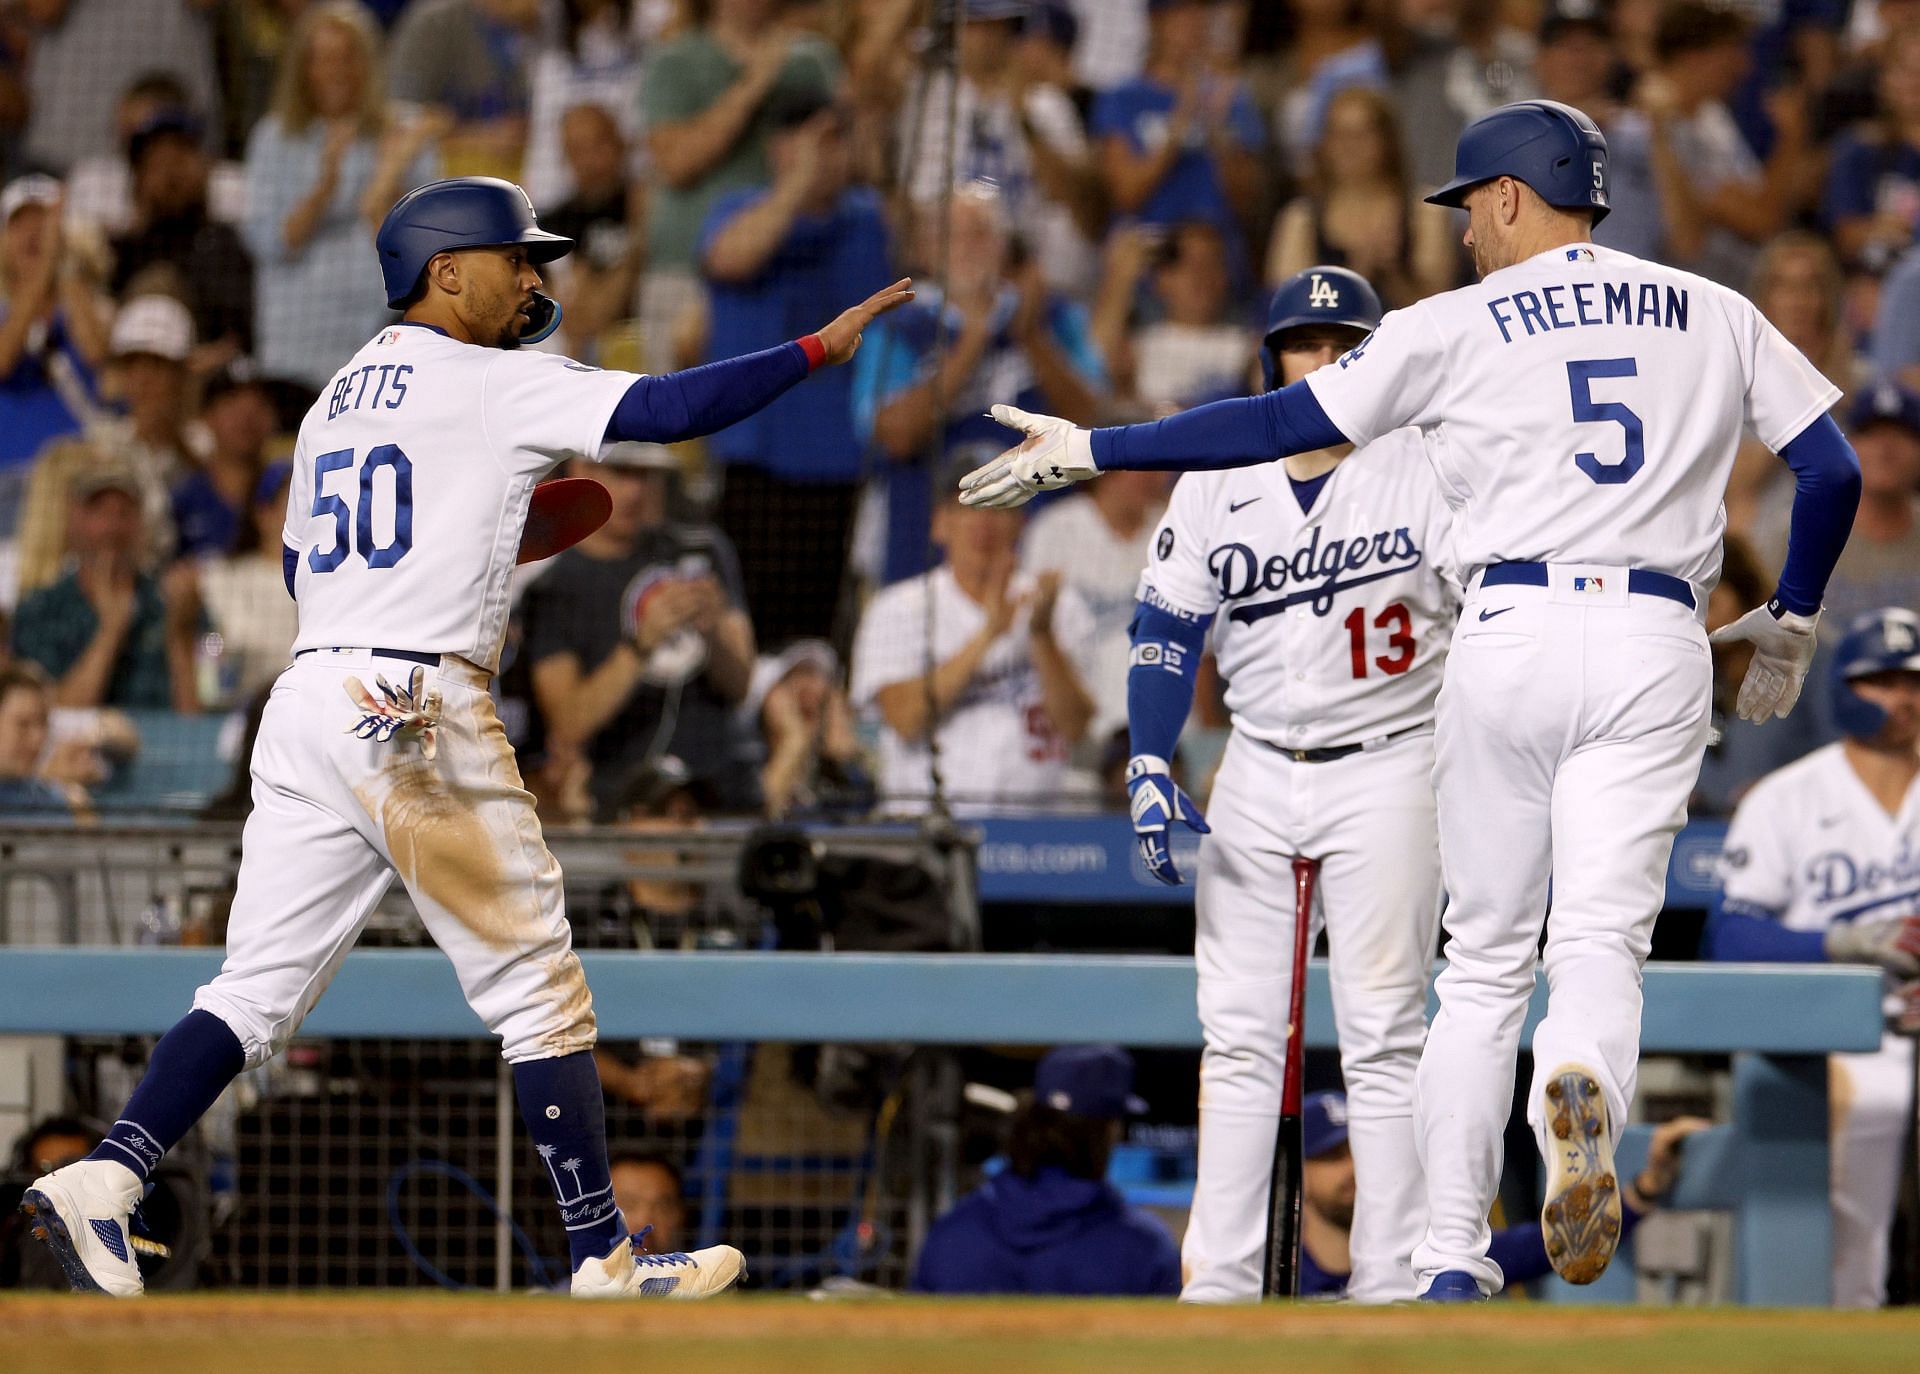 Dodgers World Series title not enough to keep team from losing money